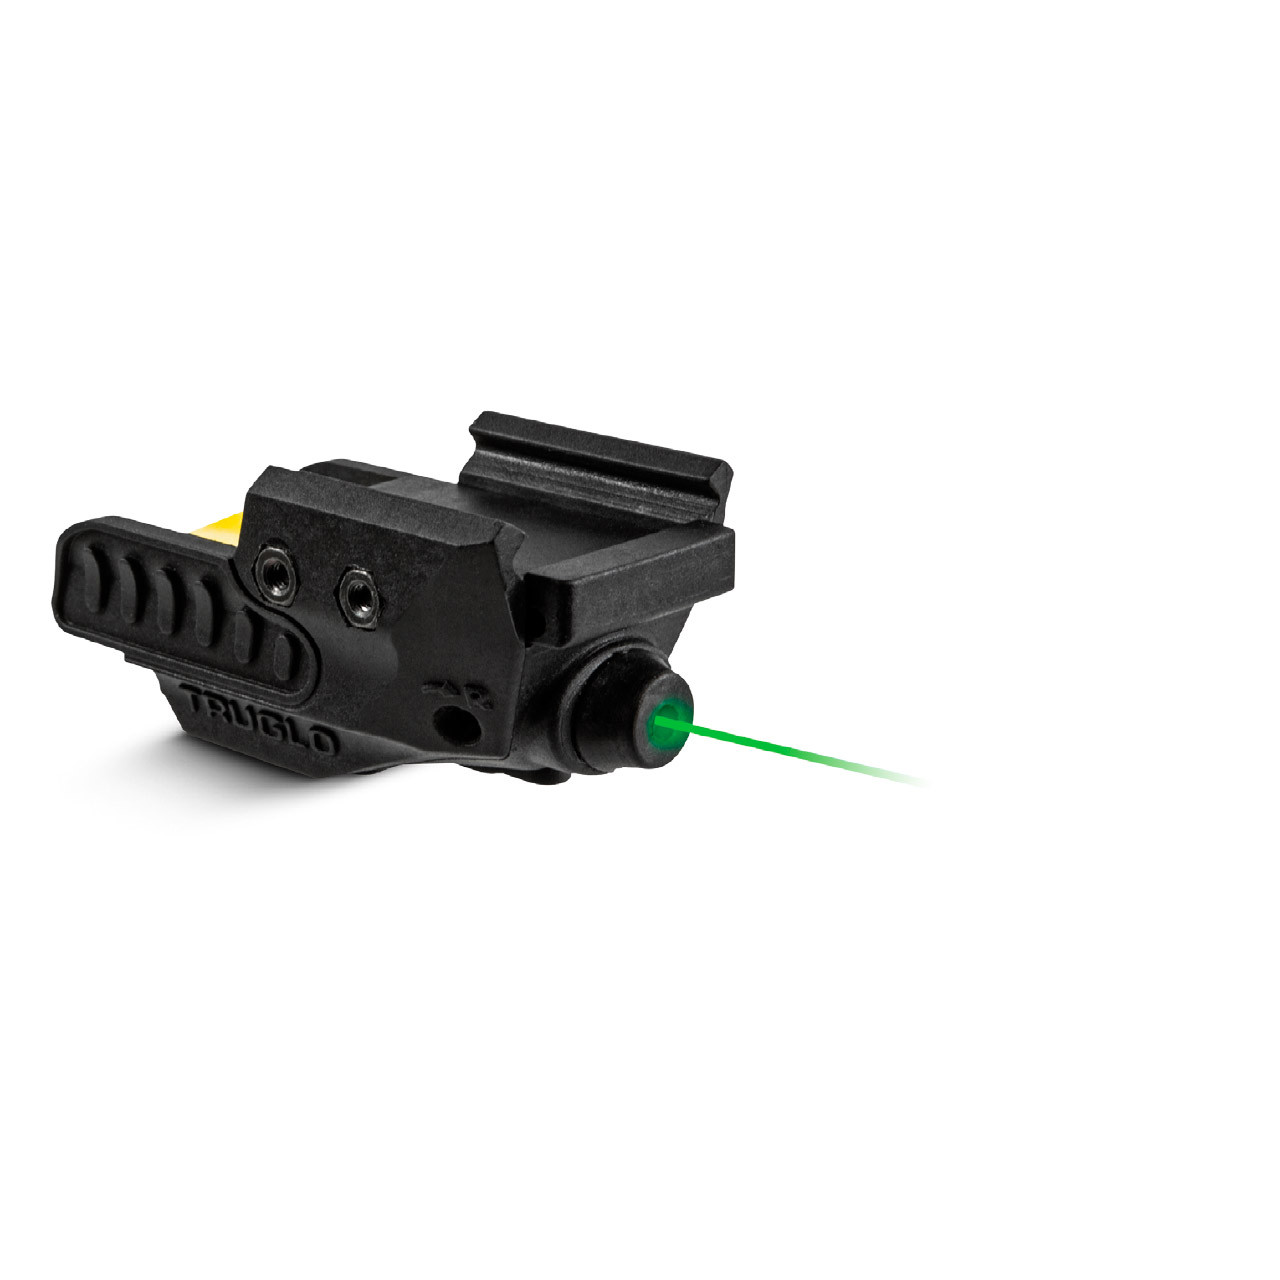 9mm pistol with laser sight